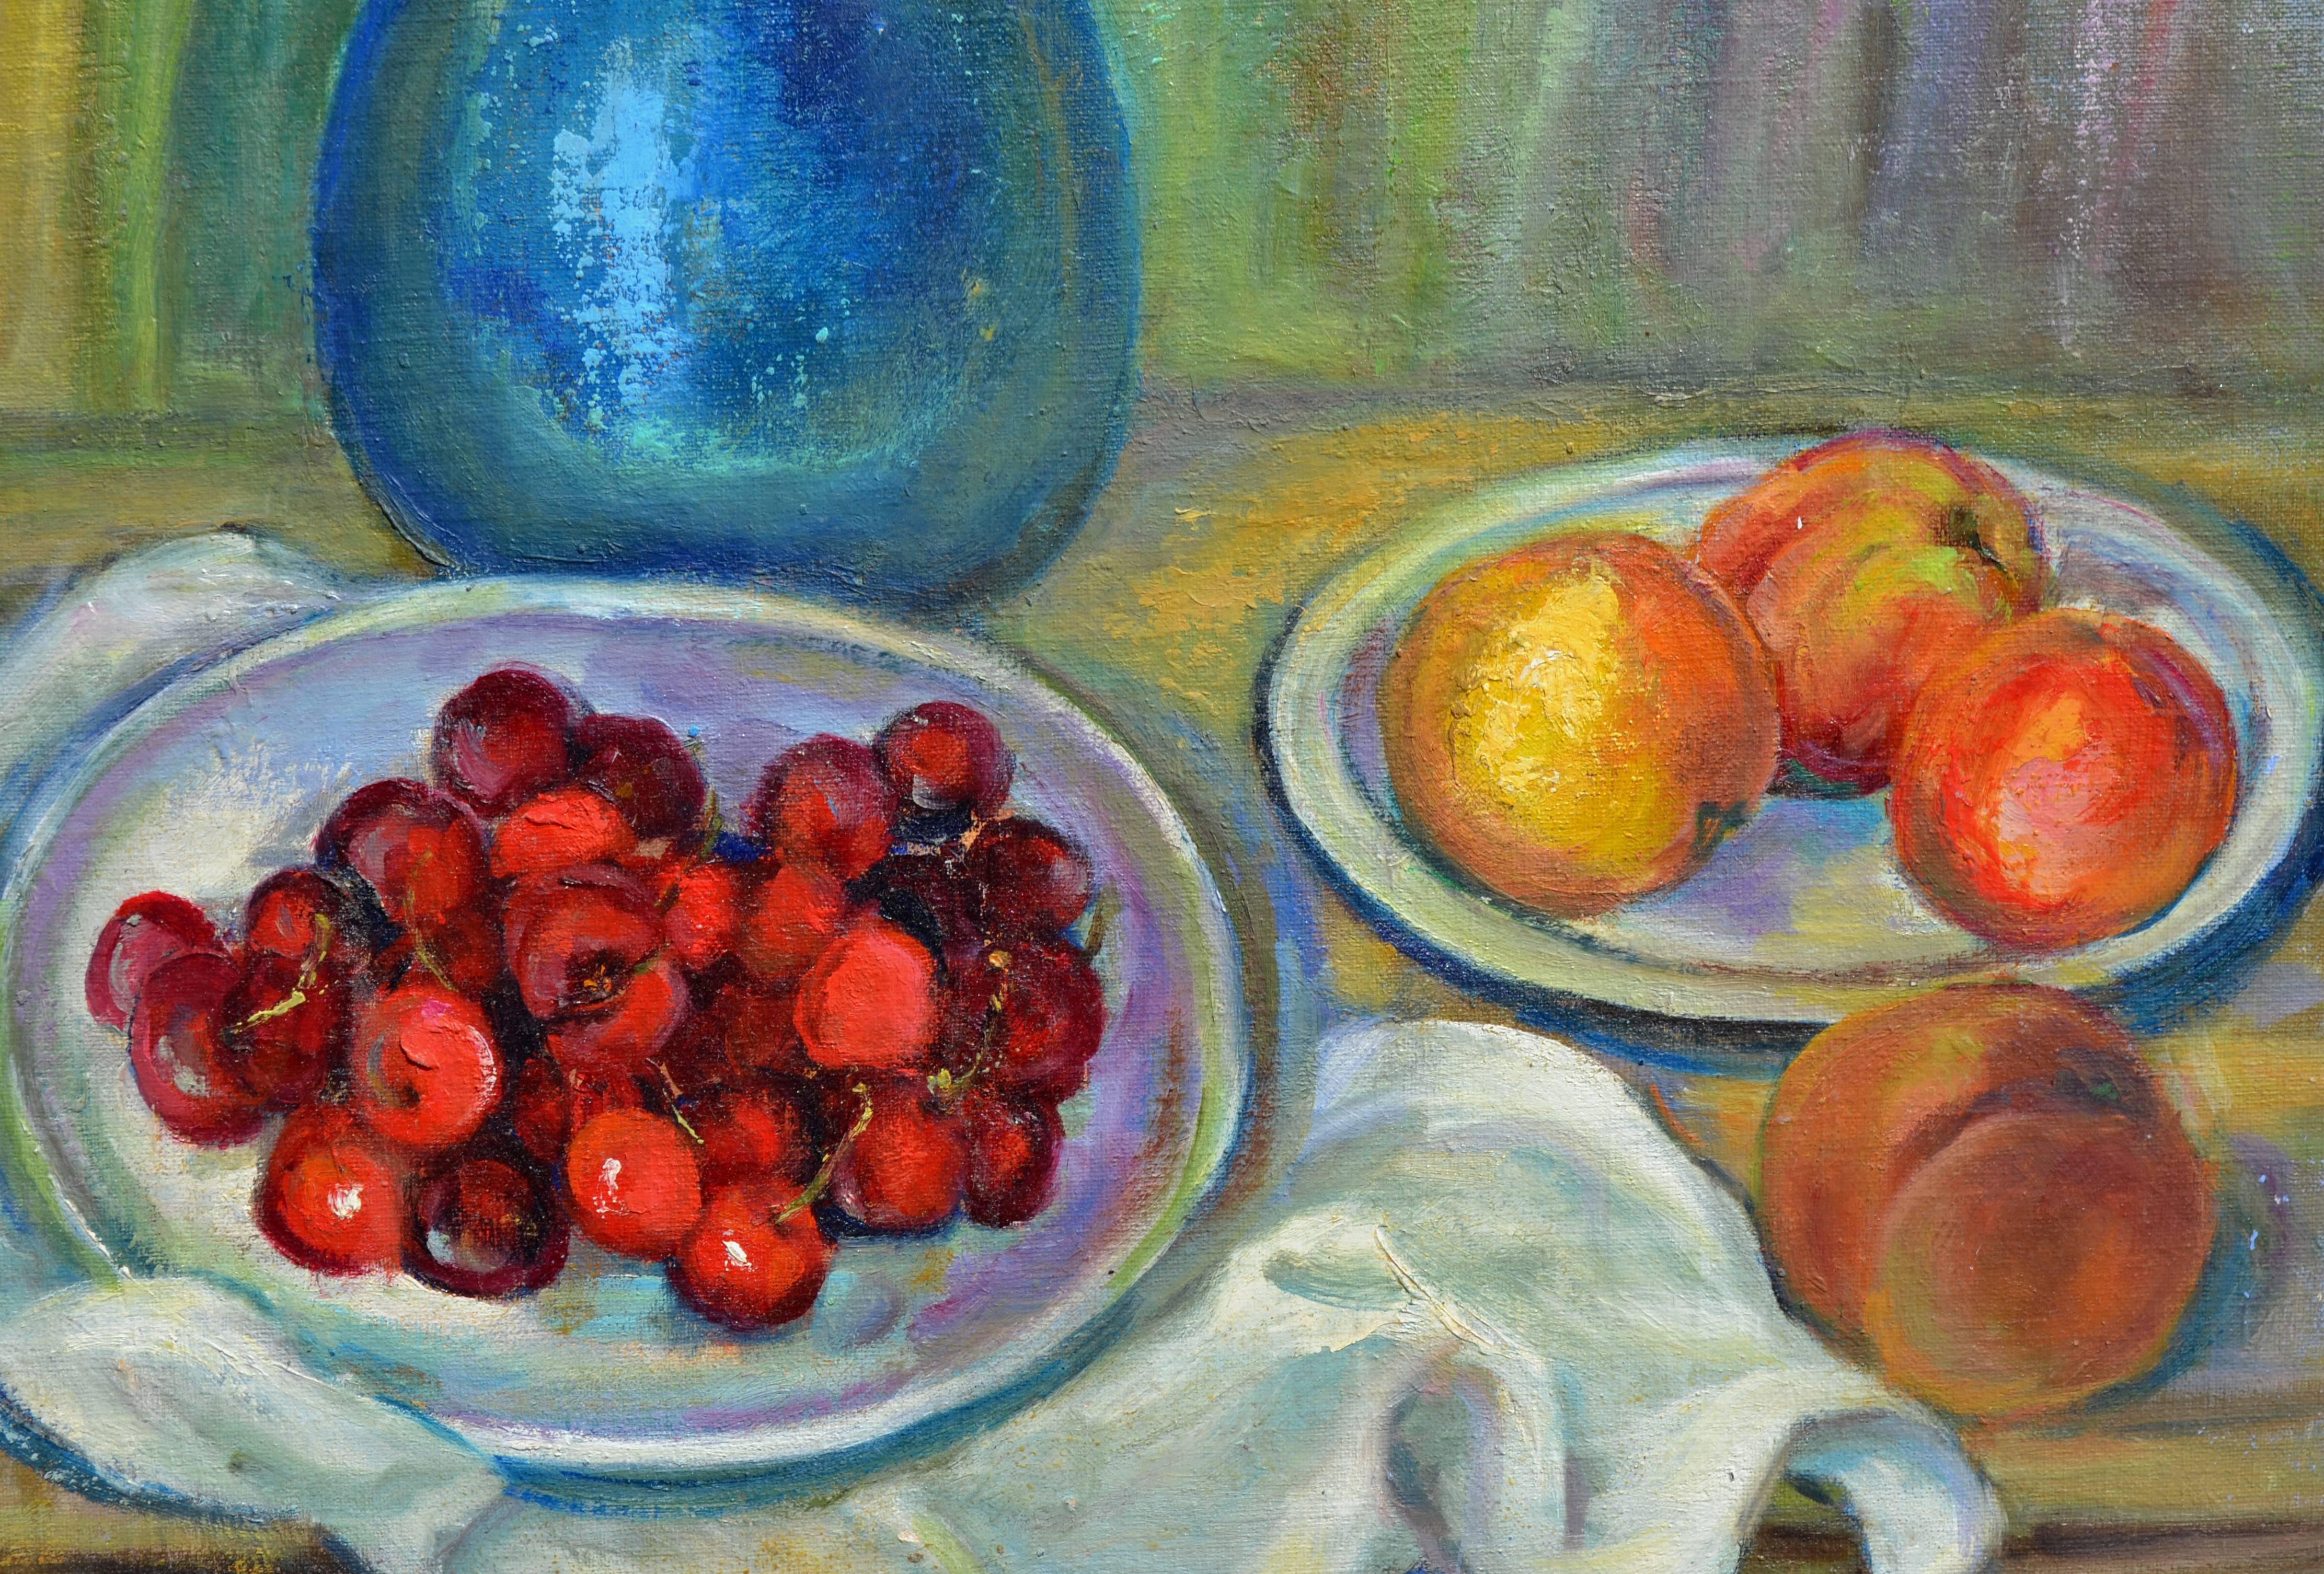 Peaches and Cherries Still Life - Painting by Helen Enoch Gleiforst